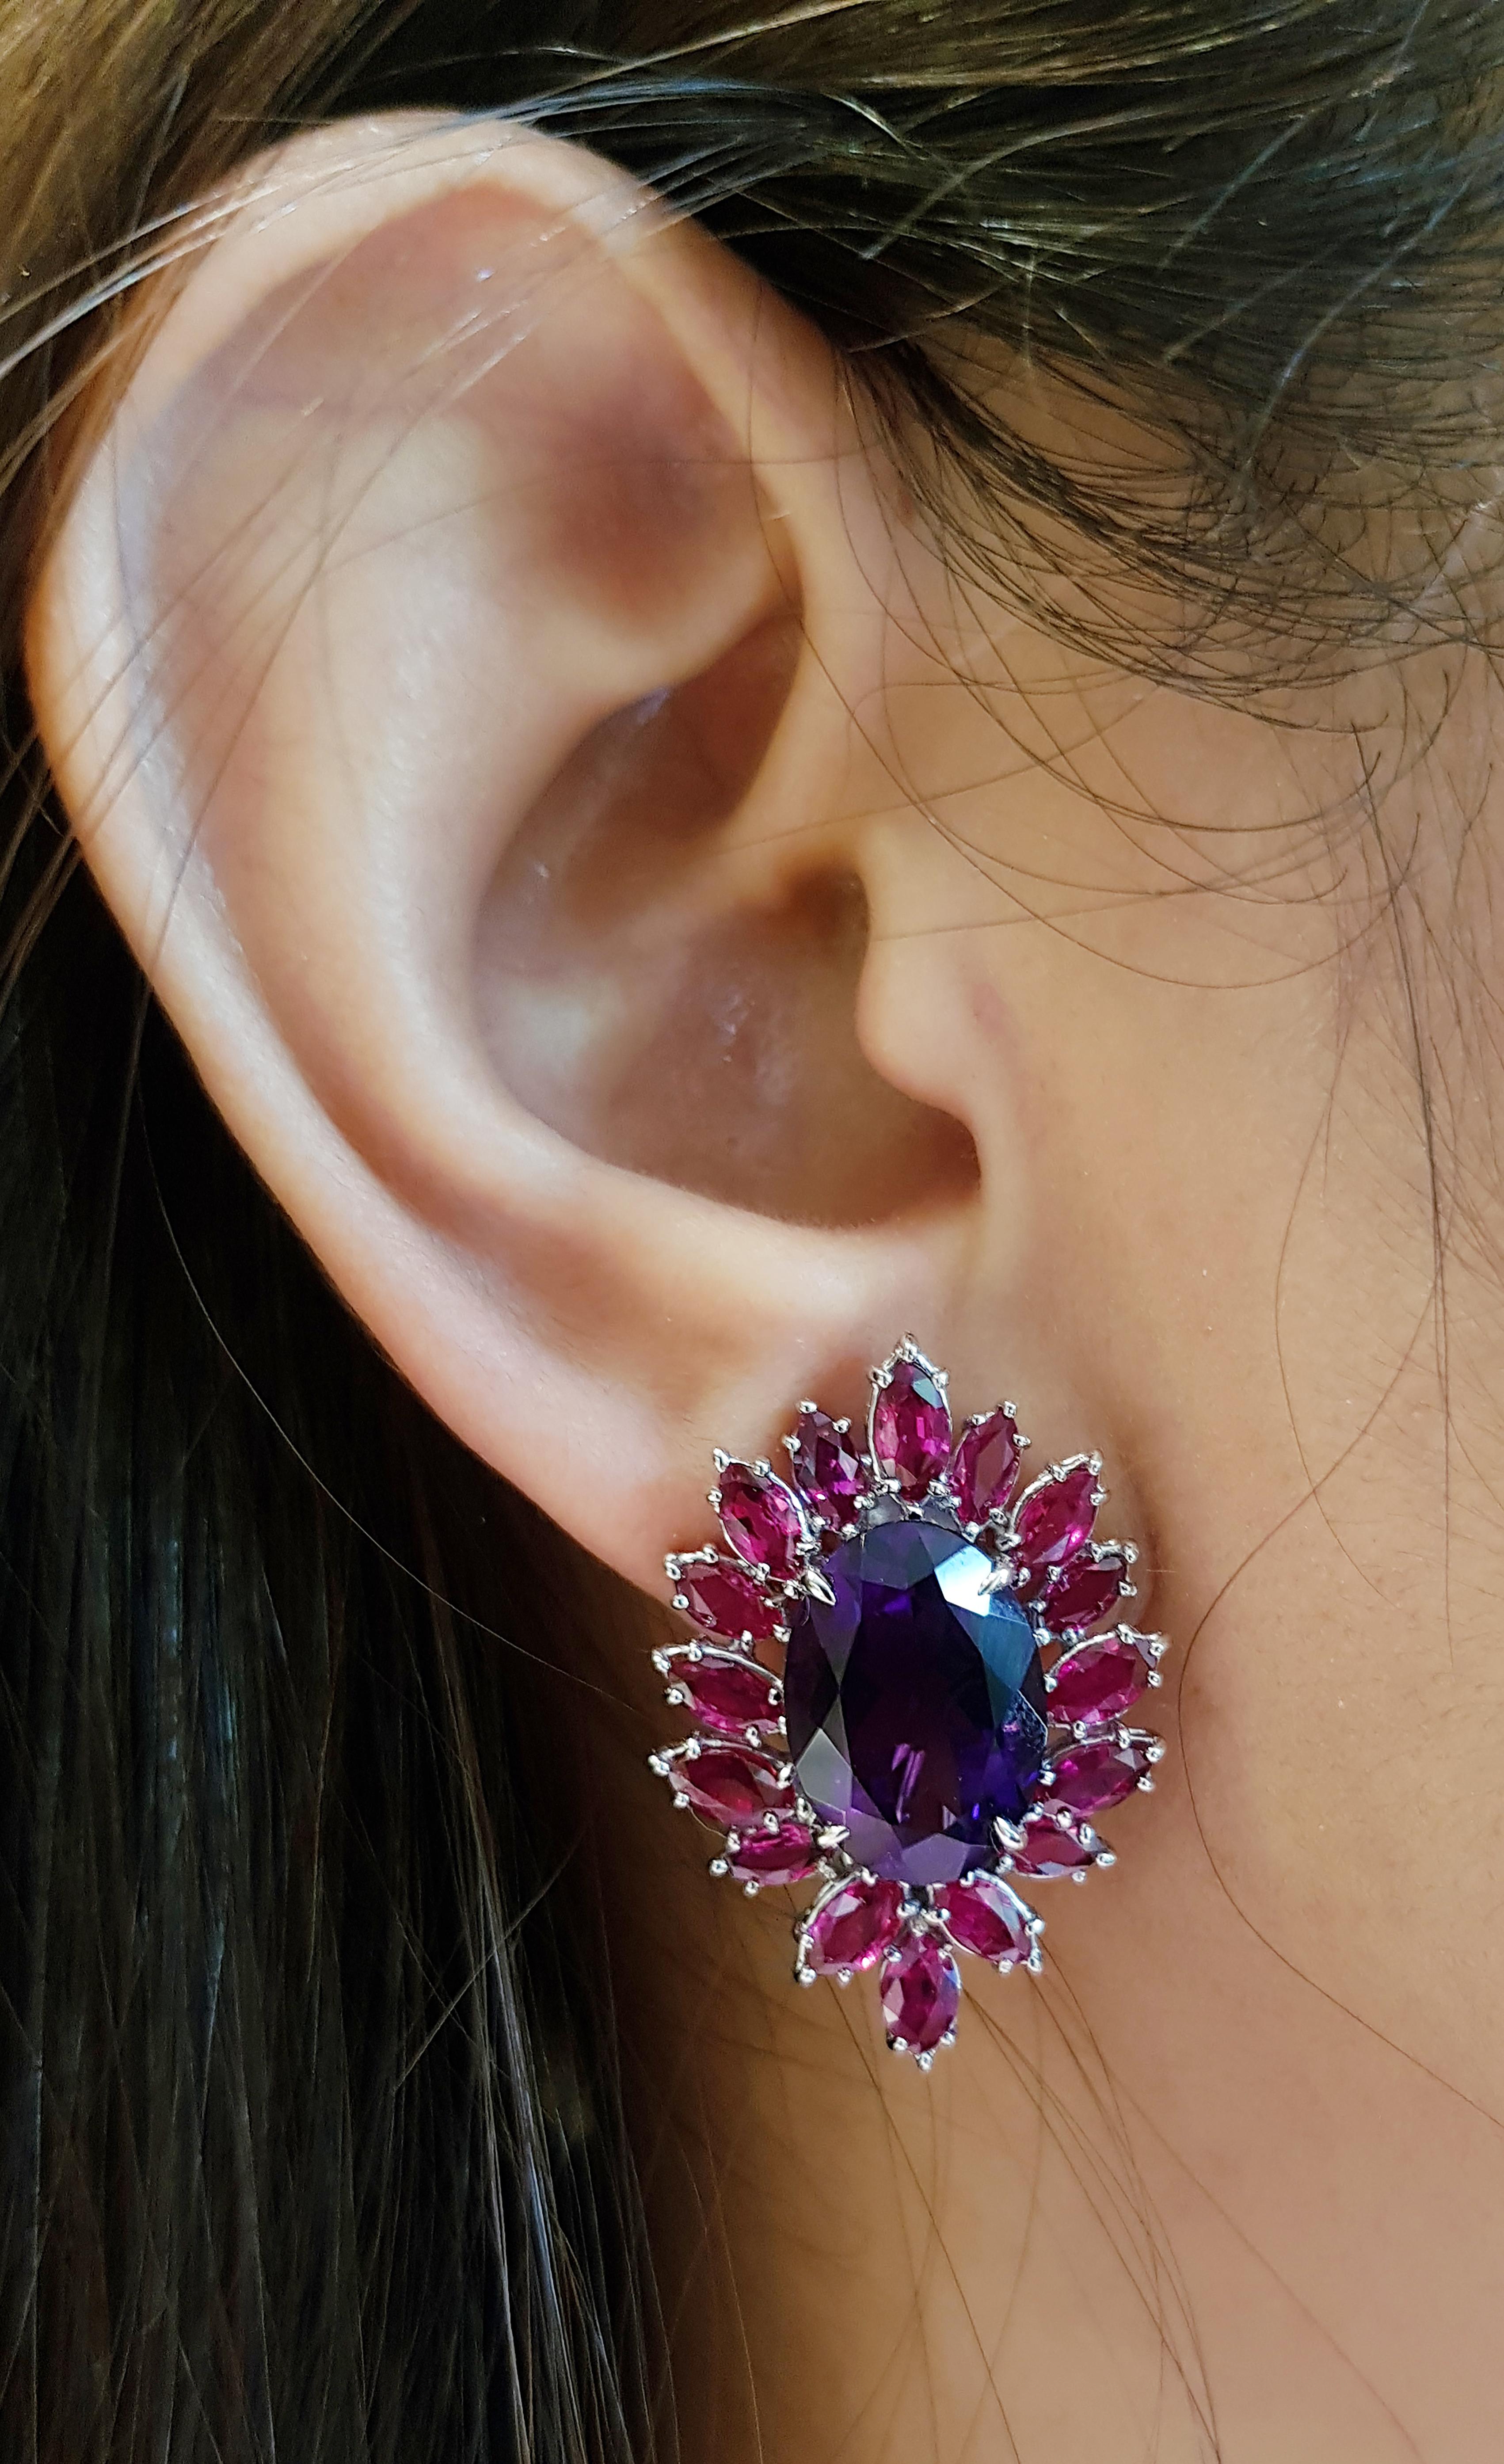 Amethyst 10.65 carats with Ruby 7.22 carats Earrings set in 18 Karat White Gold Settings

Width:  2.0 cm 
Length: 3.0 cm
Total Weight: 13.86 grams

